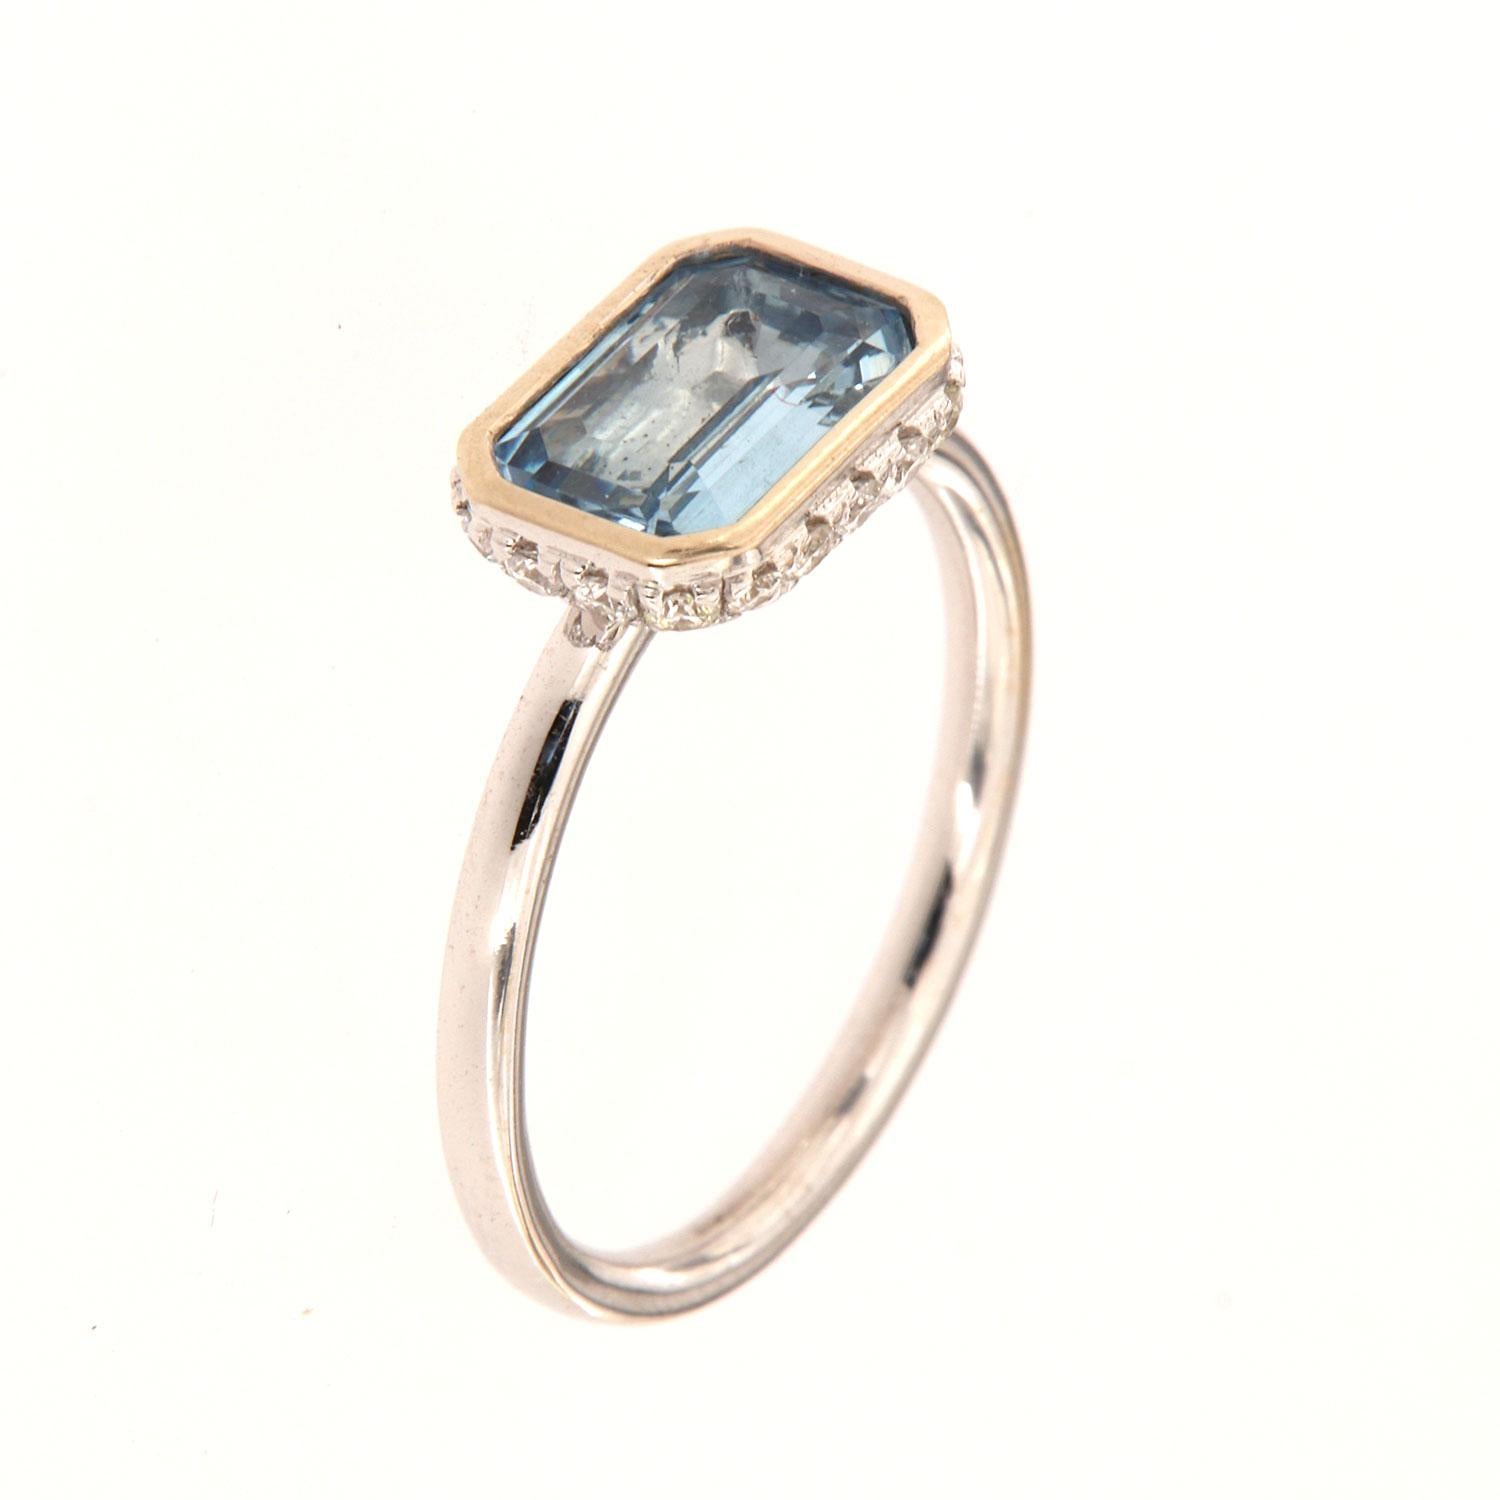 This 14k White gold delicate ring features a 1.23 Carat Blue Aquamarine emerald cut bezel set East-West style. Sixteen (16)Brilliant round diamonds are micro-prong set in a hidden halo on the crown to create the sparkle look every woman is looking